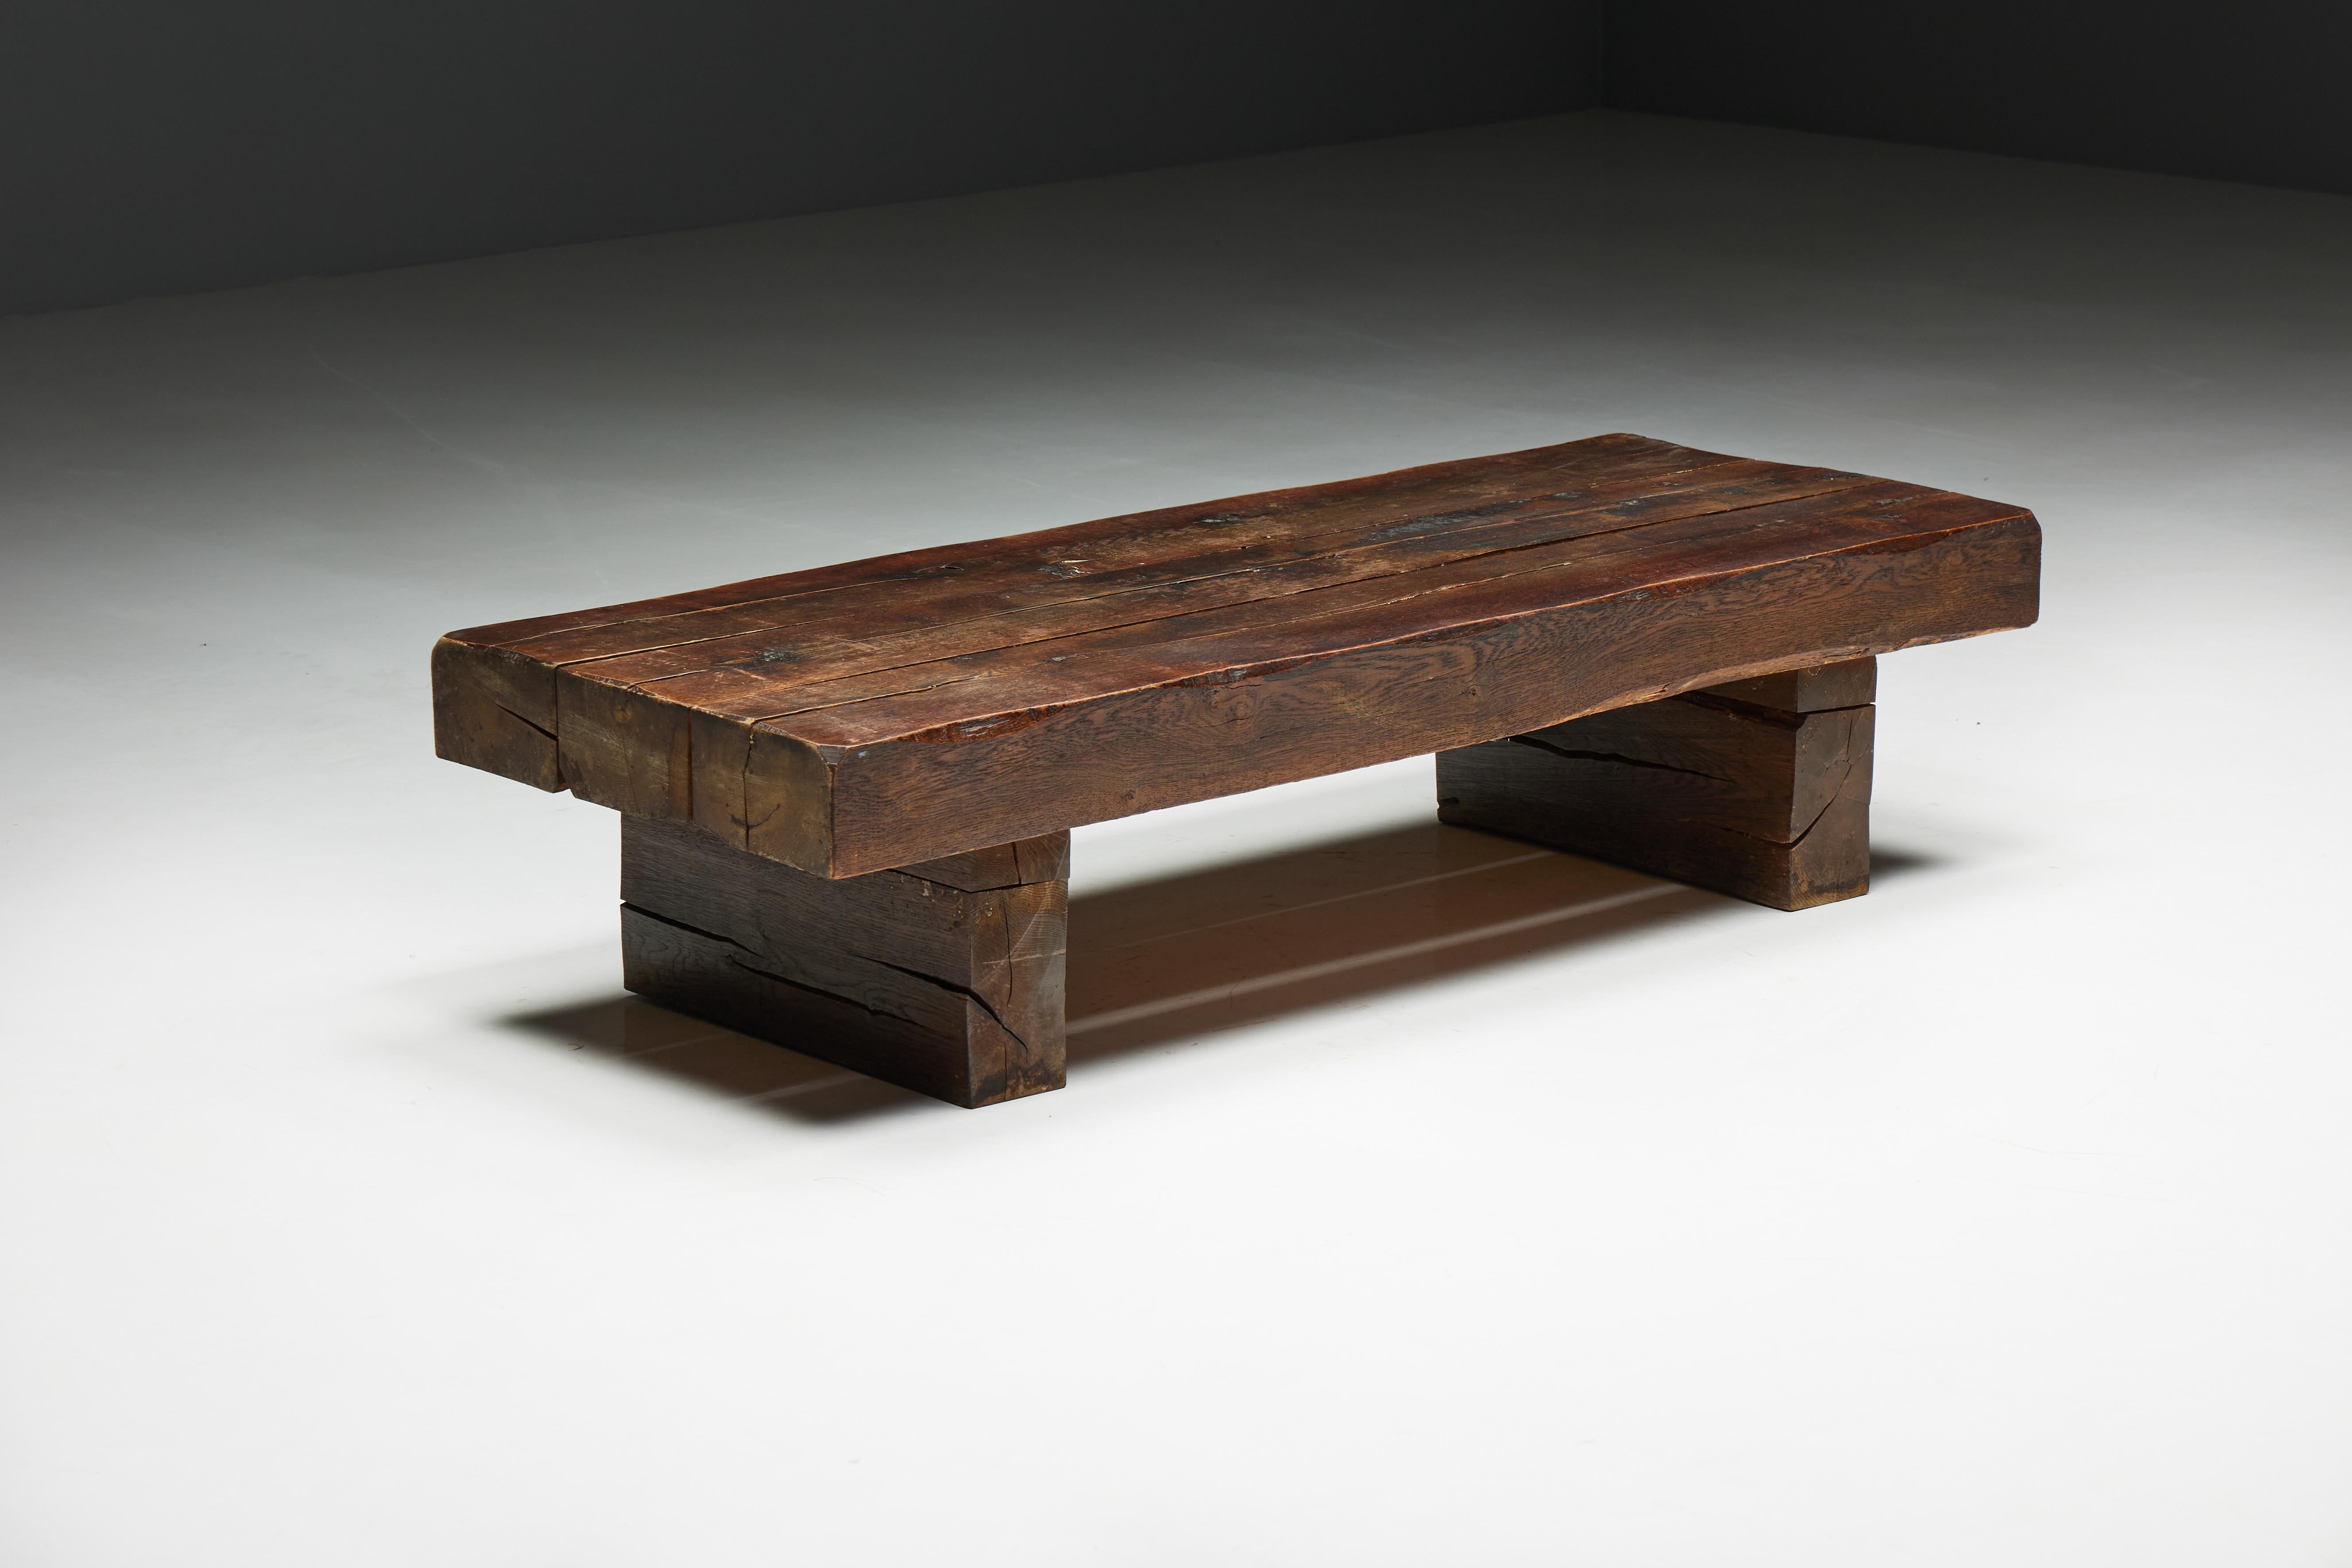 Wood Brutalist Rectangular Coffee Table, France, 1950s For Sale